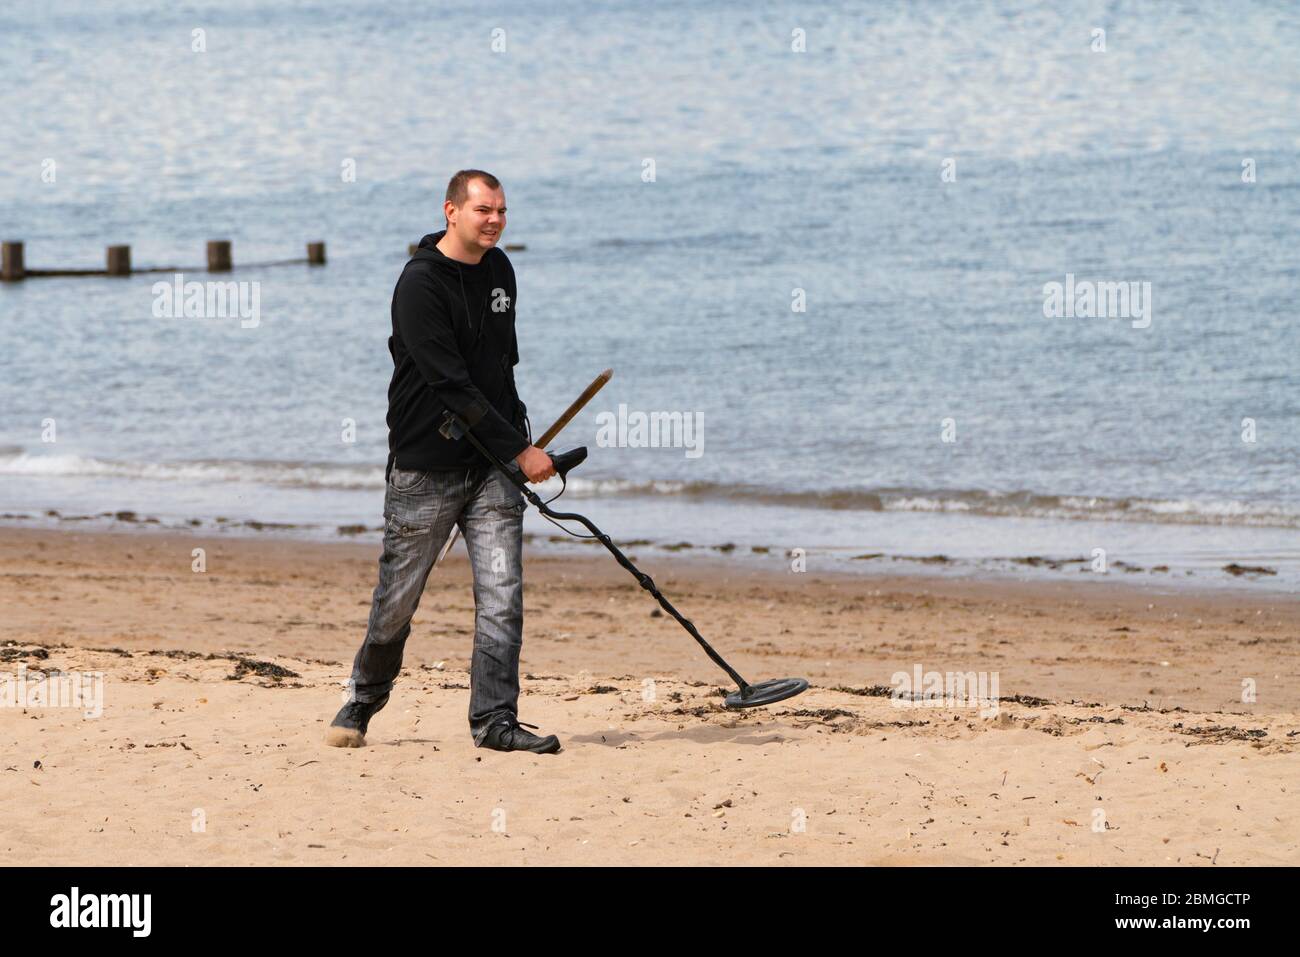 Portobello, Scotland, UK. 9 May 2020. Images from holiday weekend Saturday afternoon during Covid-19 lockdown on promenade at Portobello. Promenade and beach were relatively quiet with a low key police presence. Pictured;  Man with metal detector on the beach. Iain Masterton/Alamy Live News Stock Photo